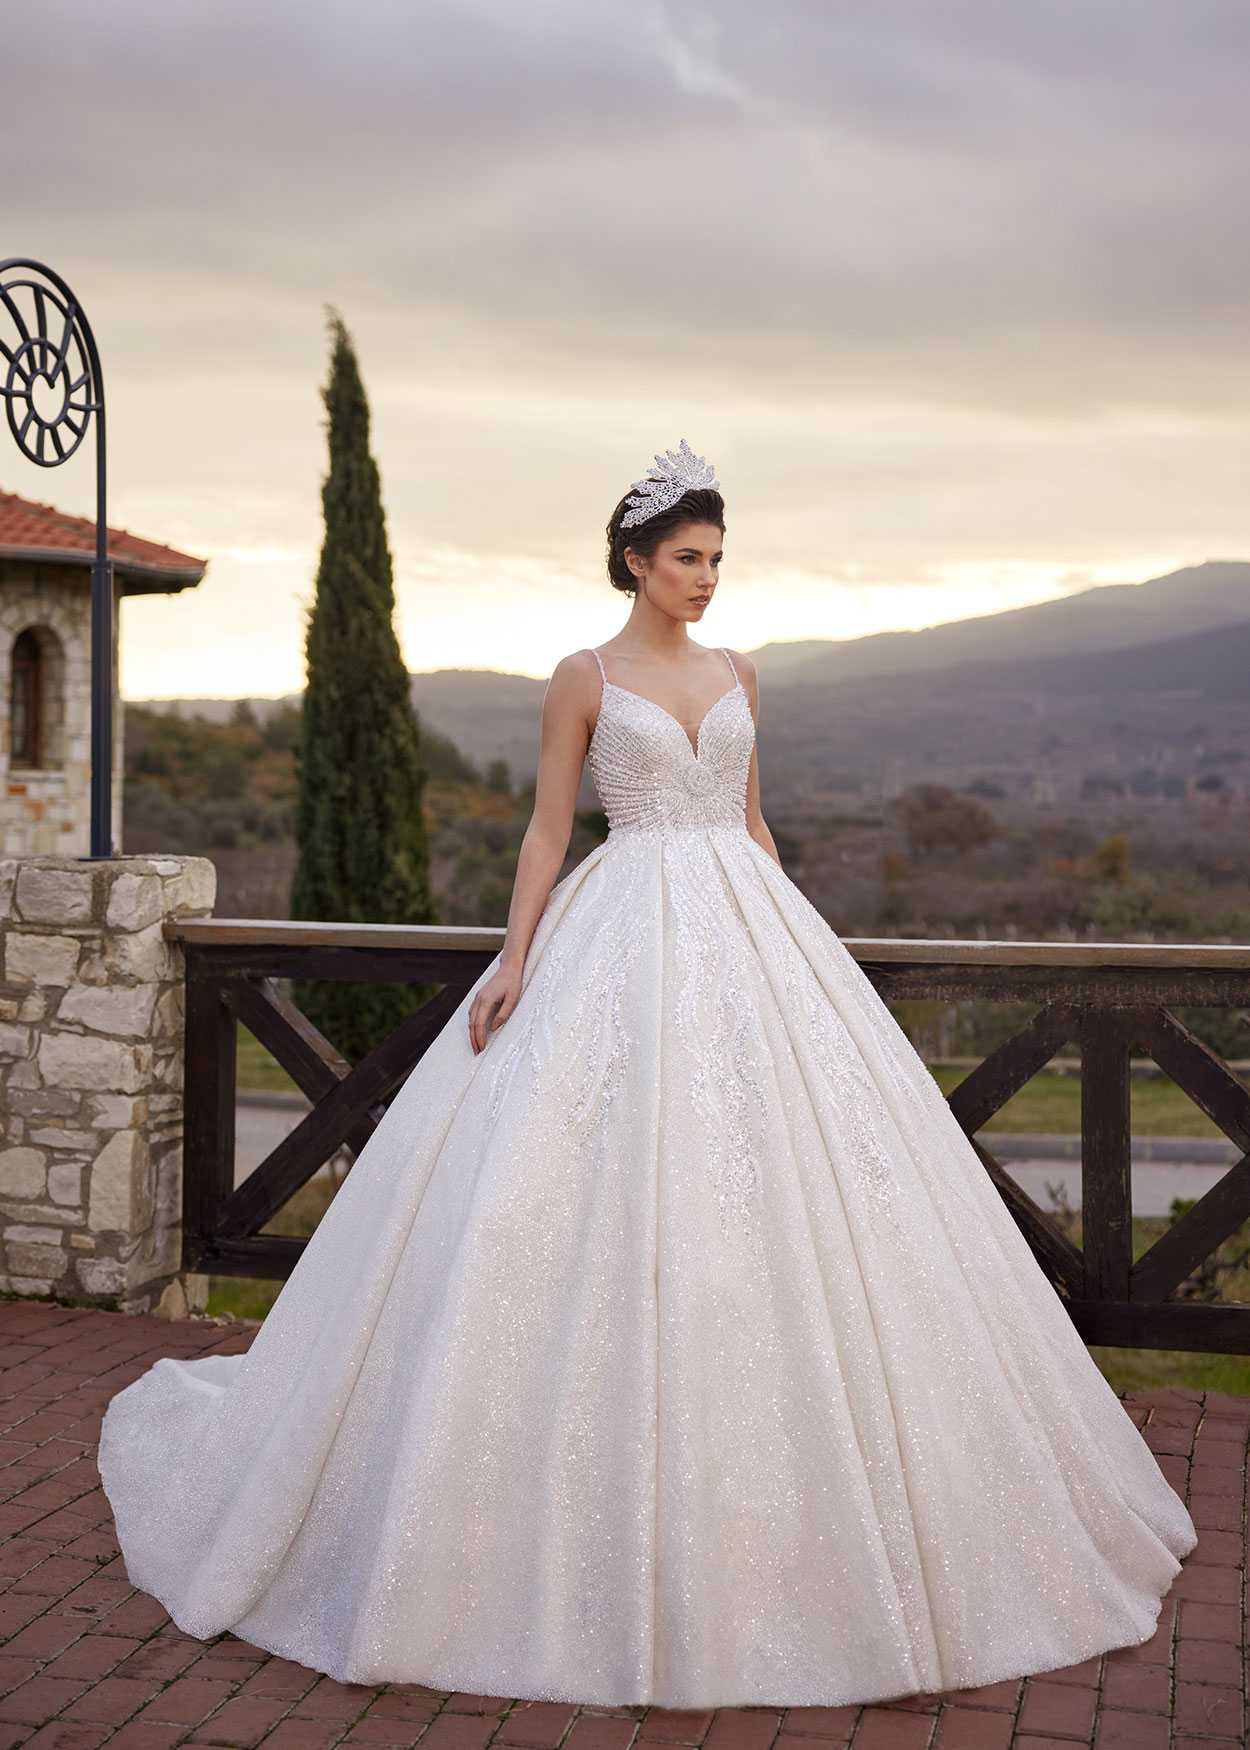 Tulle A-line Beaded Sweetheart Neck Wedding Dress MW911 | Musebridals